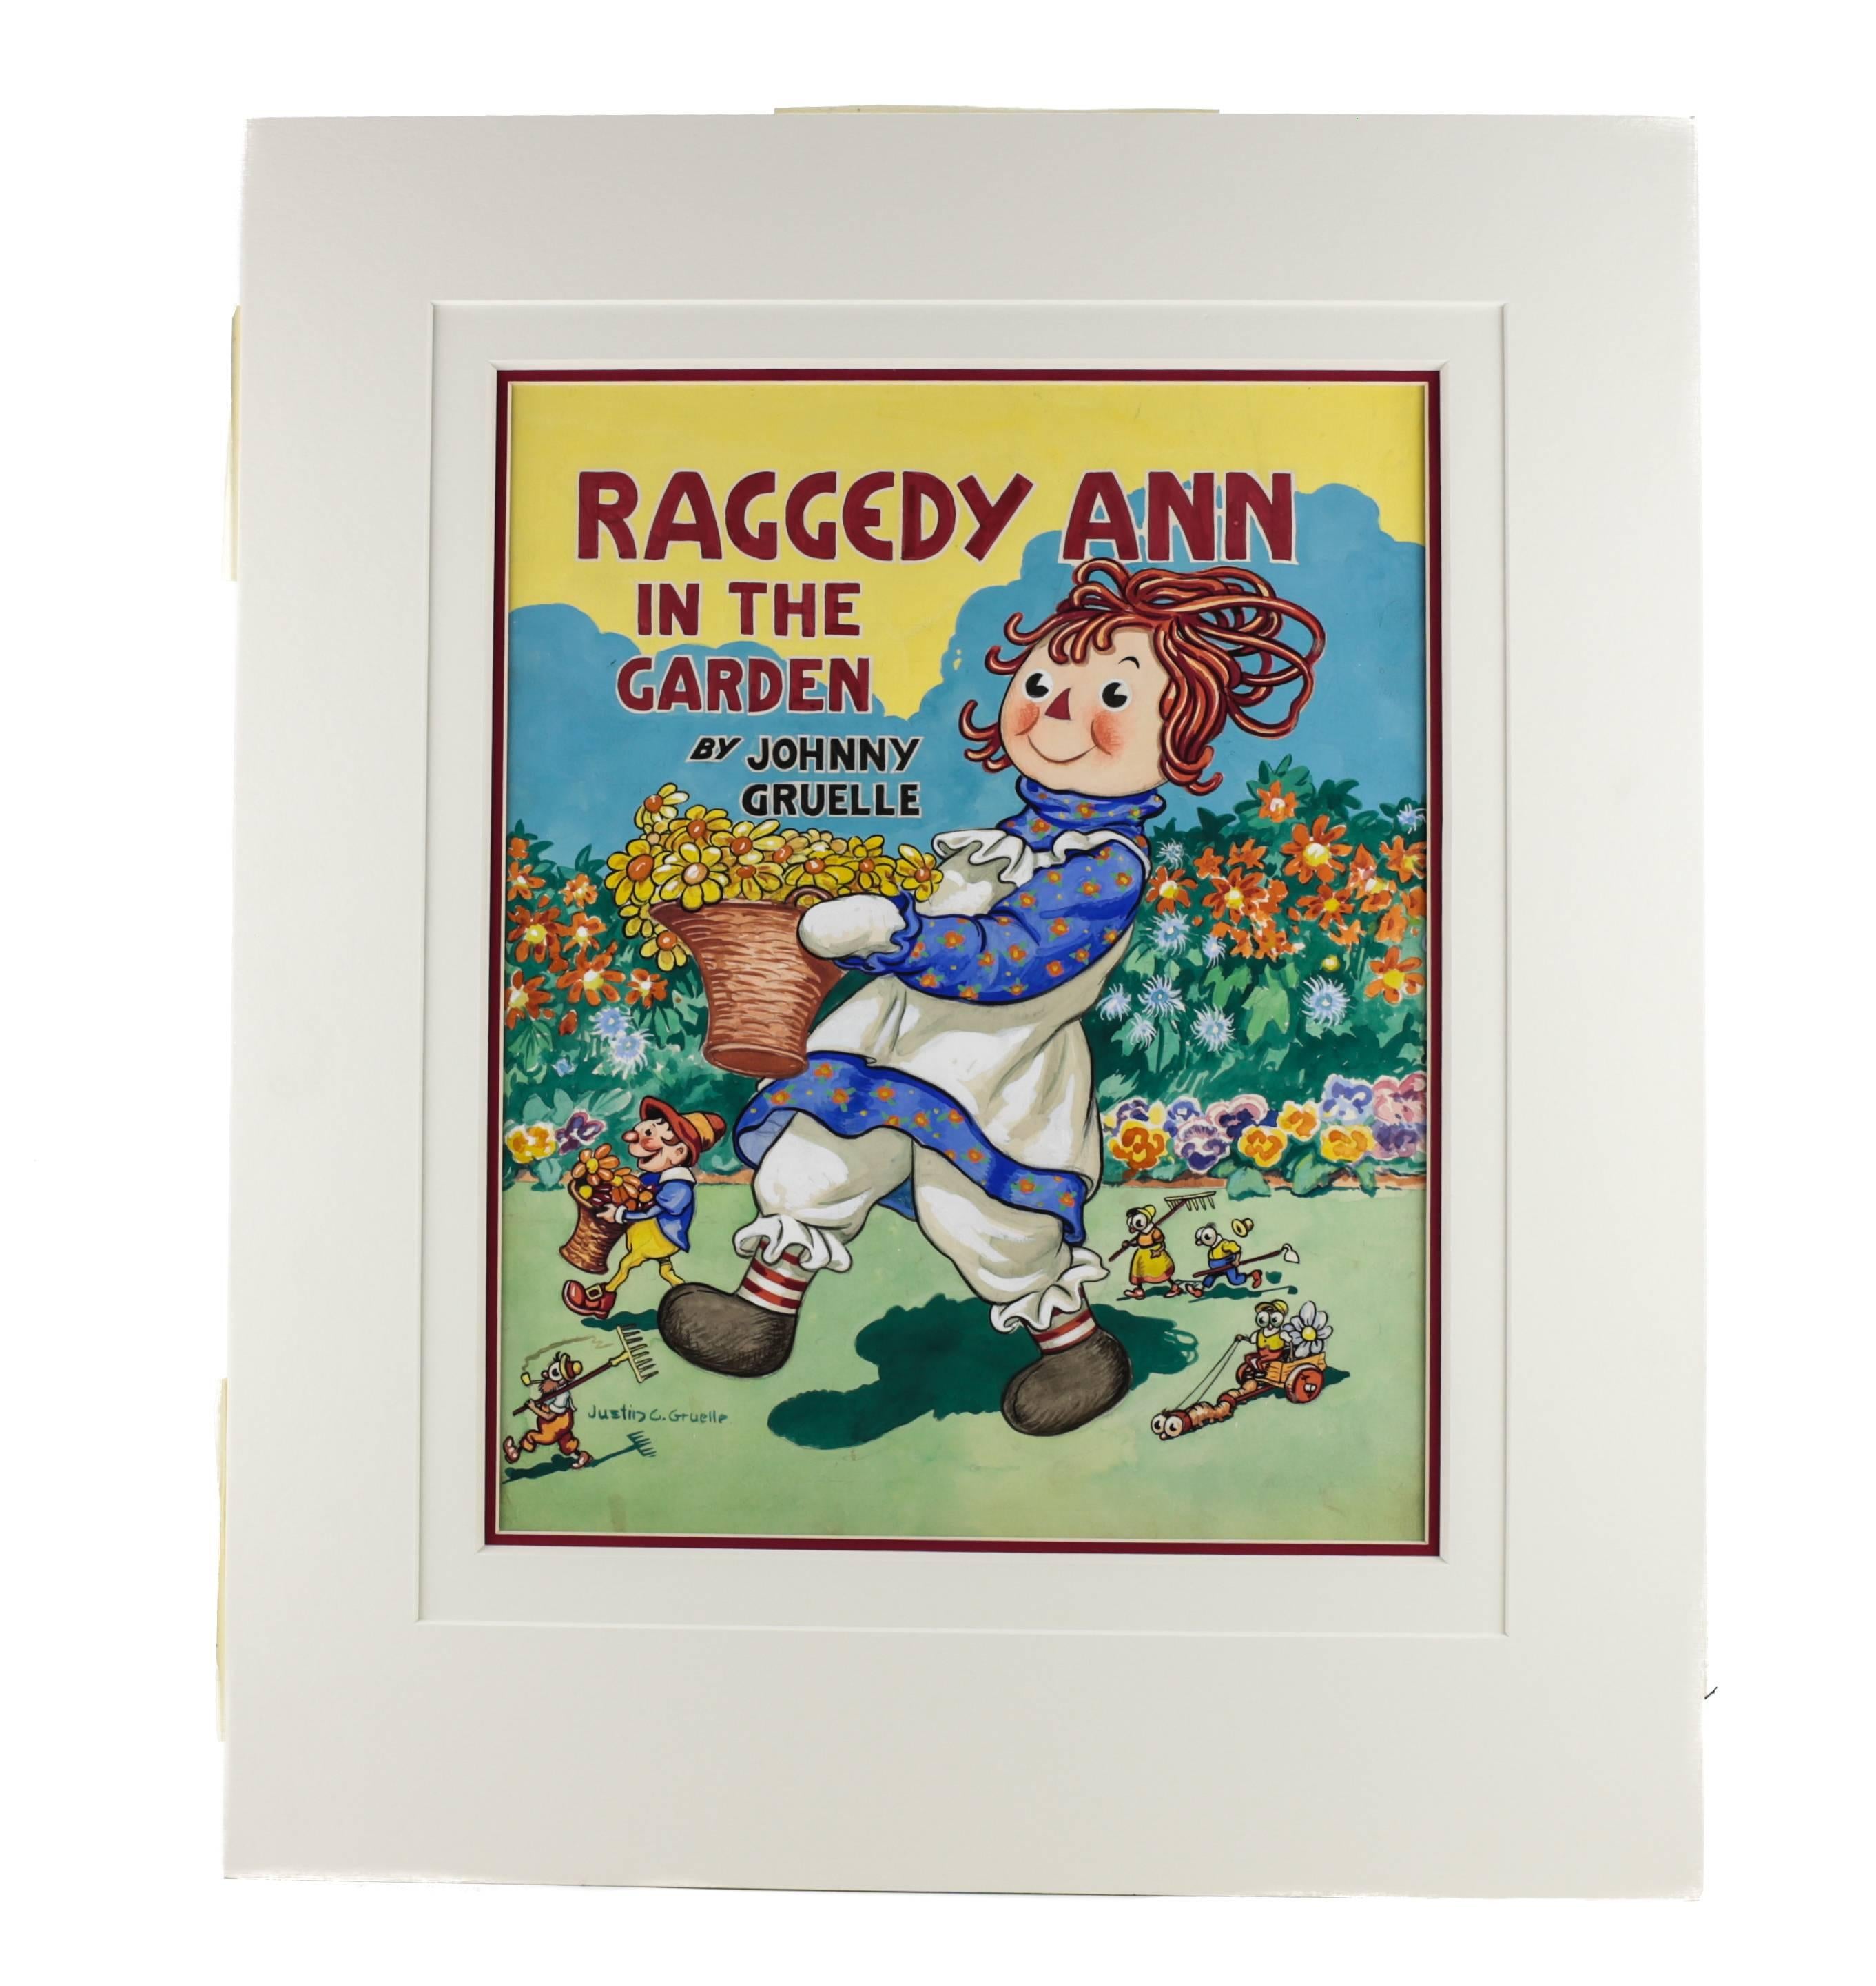 A colorful and vivid watercolor, pen and pencil by American artist Justin C. Gruelle (1889-1978) depicting a cheerful Raggedy Ann walking through a garden carrying a basket of yellow daisies. This illustration is the original front cover art for